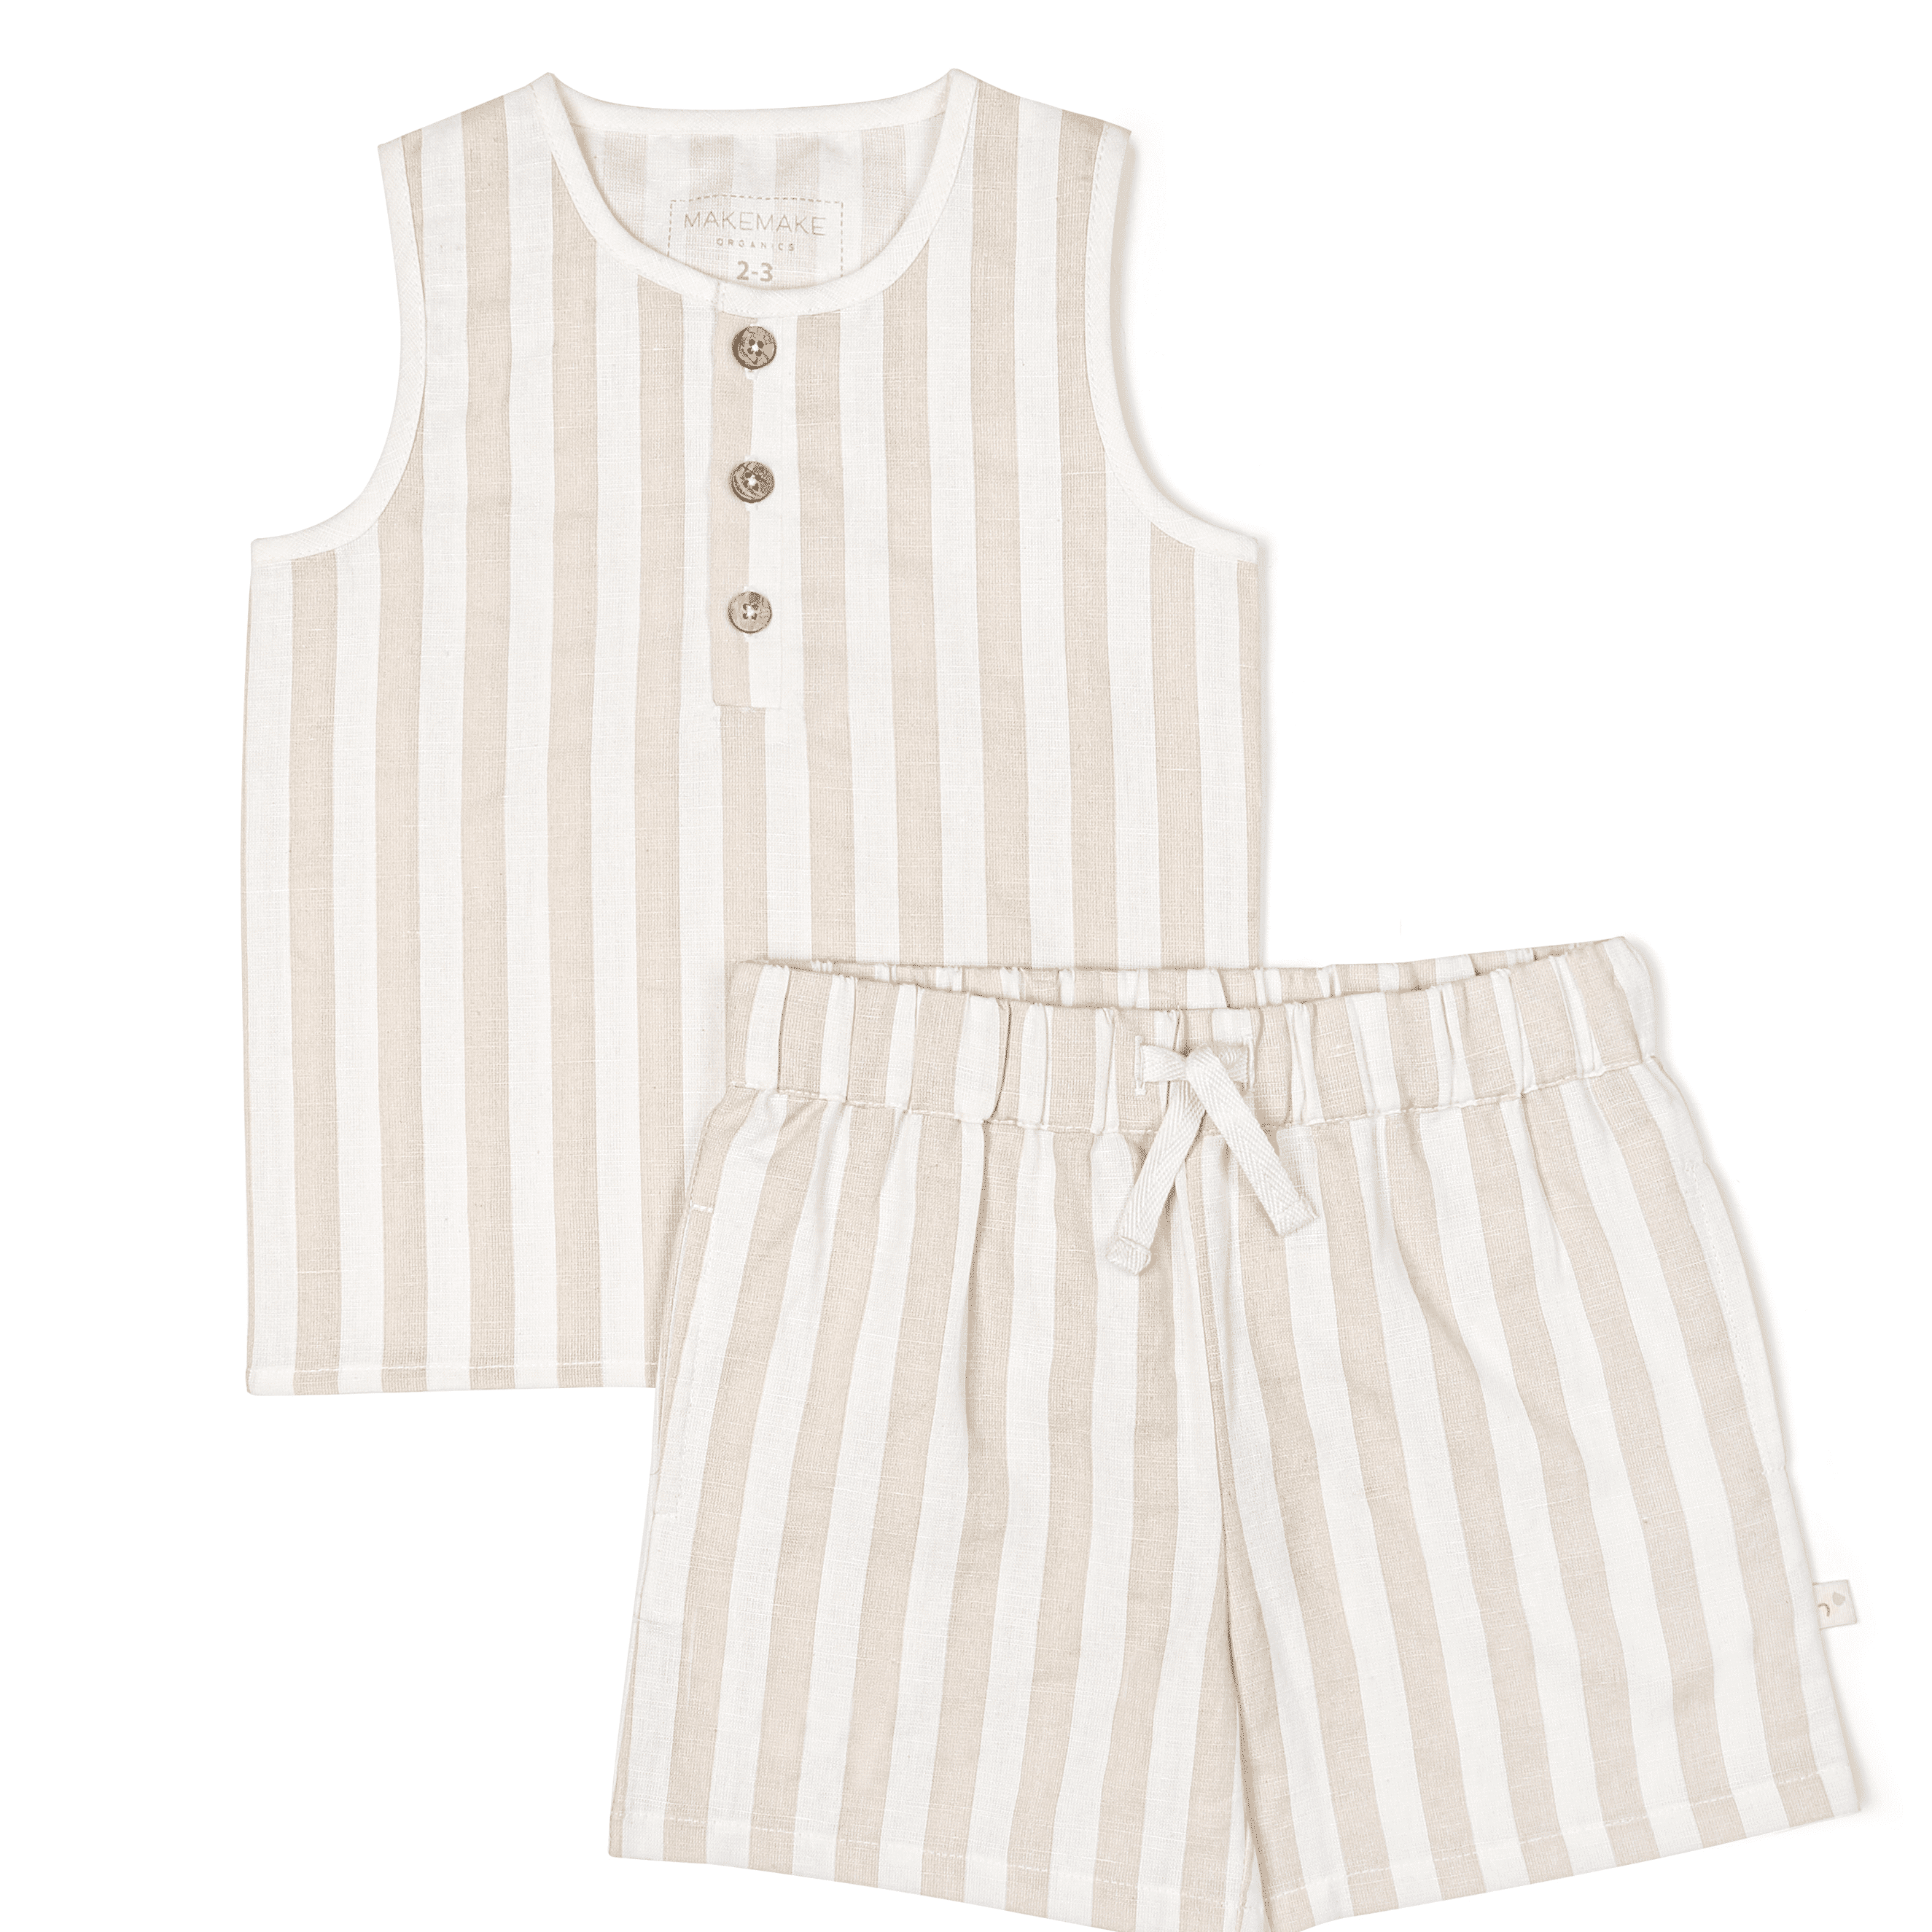 A beige and white striped toddler's outfit consisting of a sleeveless top with three buttons and matching shorts with a drawstring waist, displayed on a plain background, Makemake Organics' Organic Linen Tank and Shorts Set in Beige Stripes.